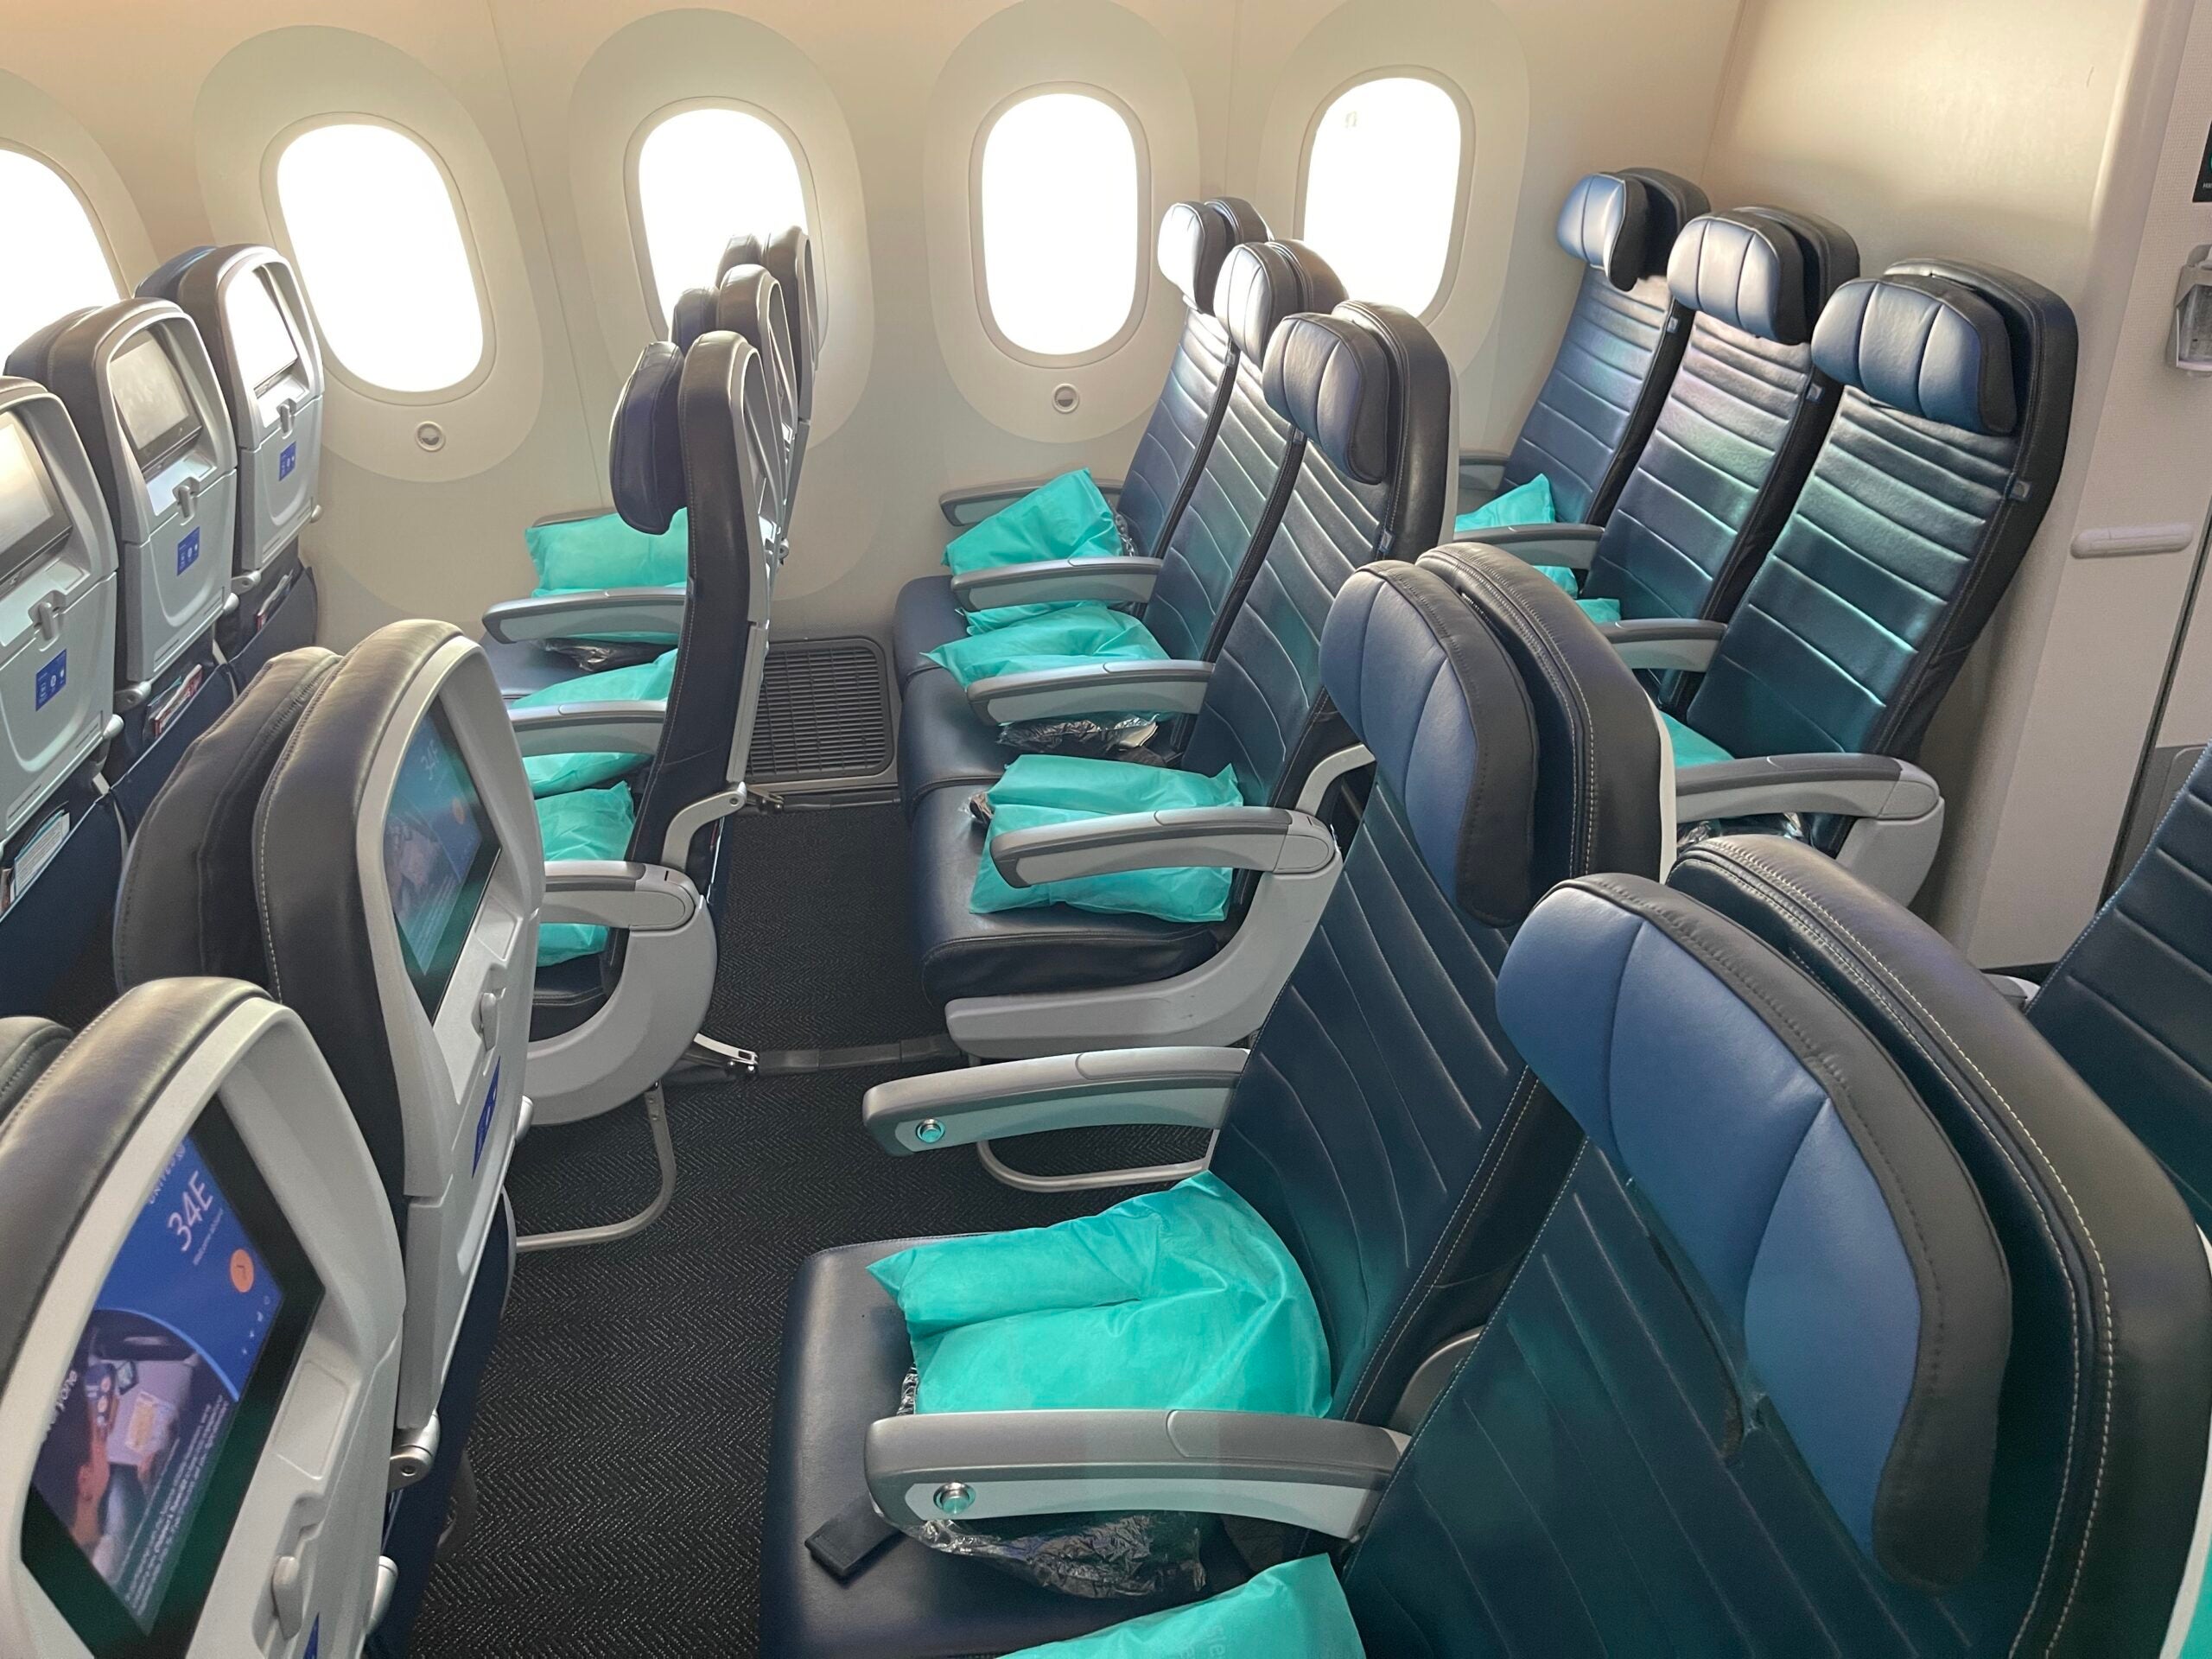 https://thepointsguy.global.ssl.fastly.net/us/originals/2023/01/United-Airlines-economy-class-on-a-Boeing-787-9-Dreamliner-scaled.jpg